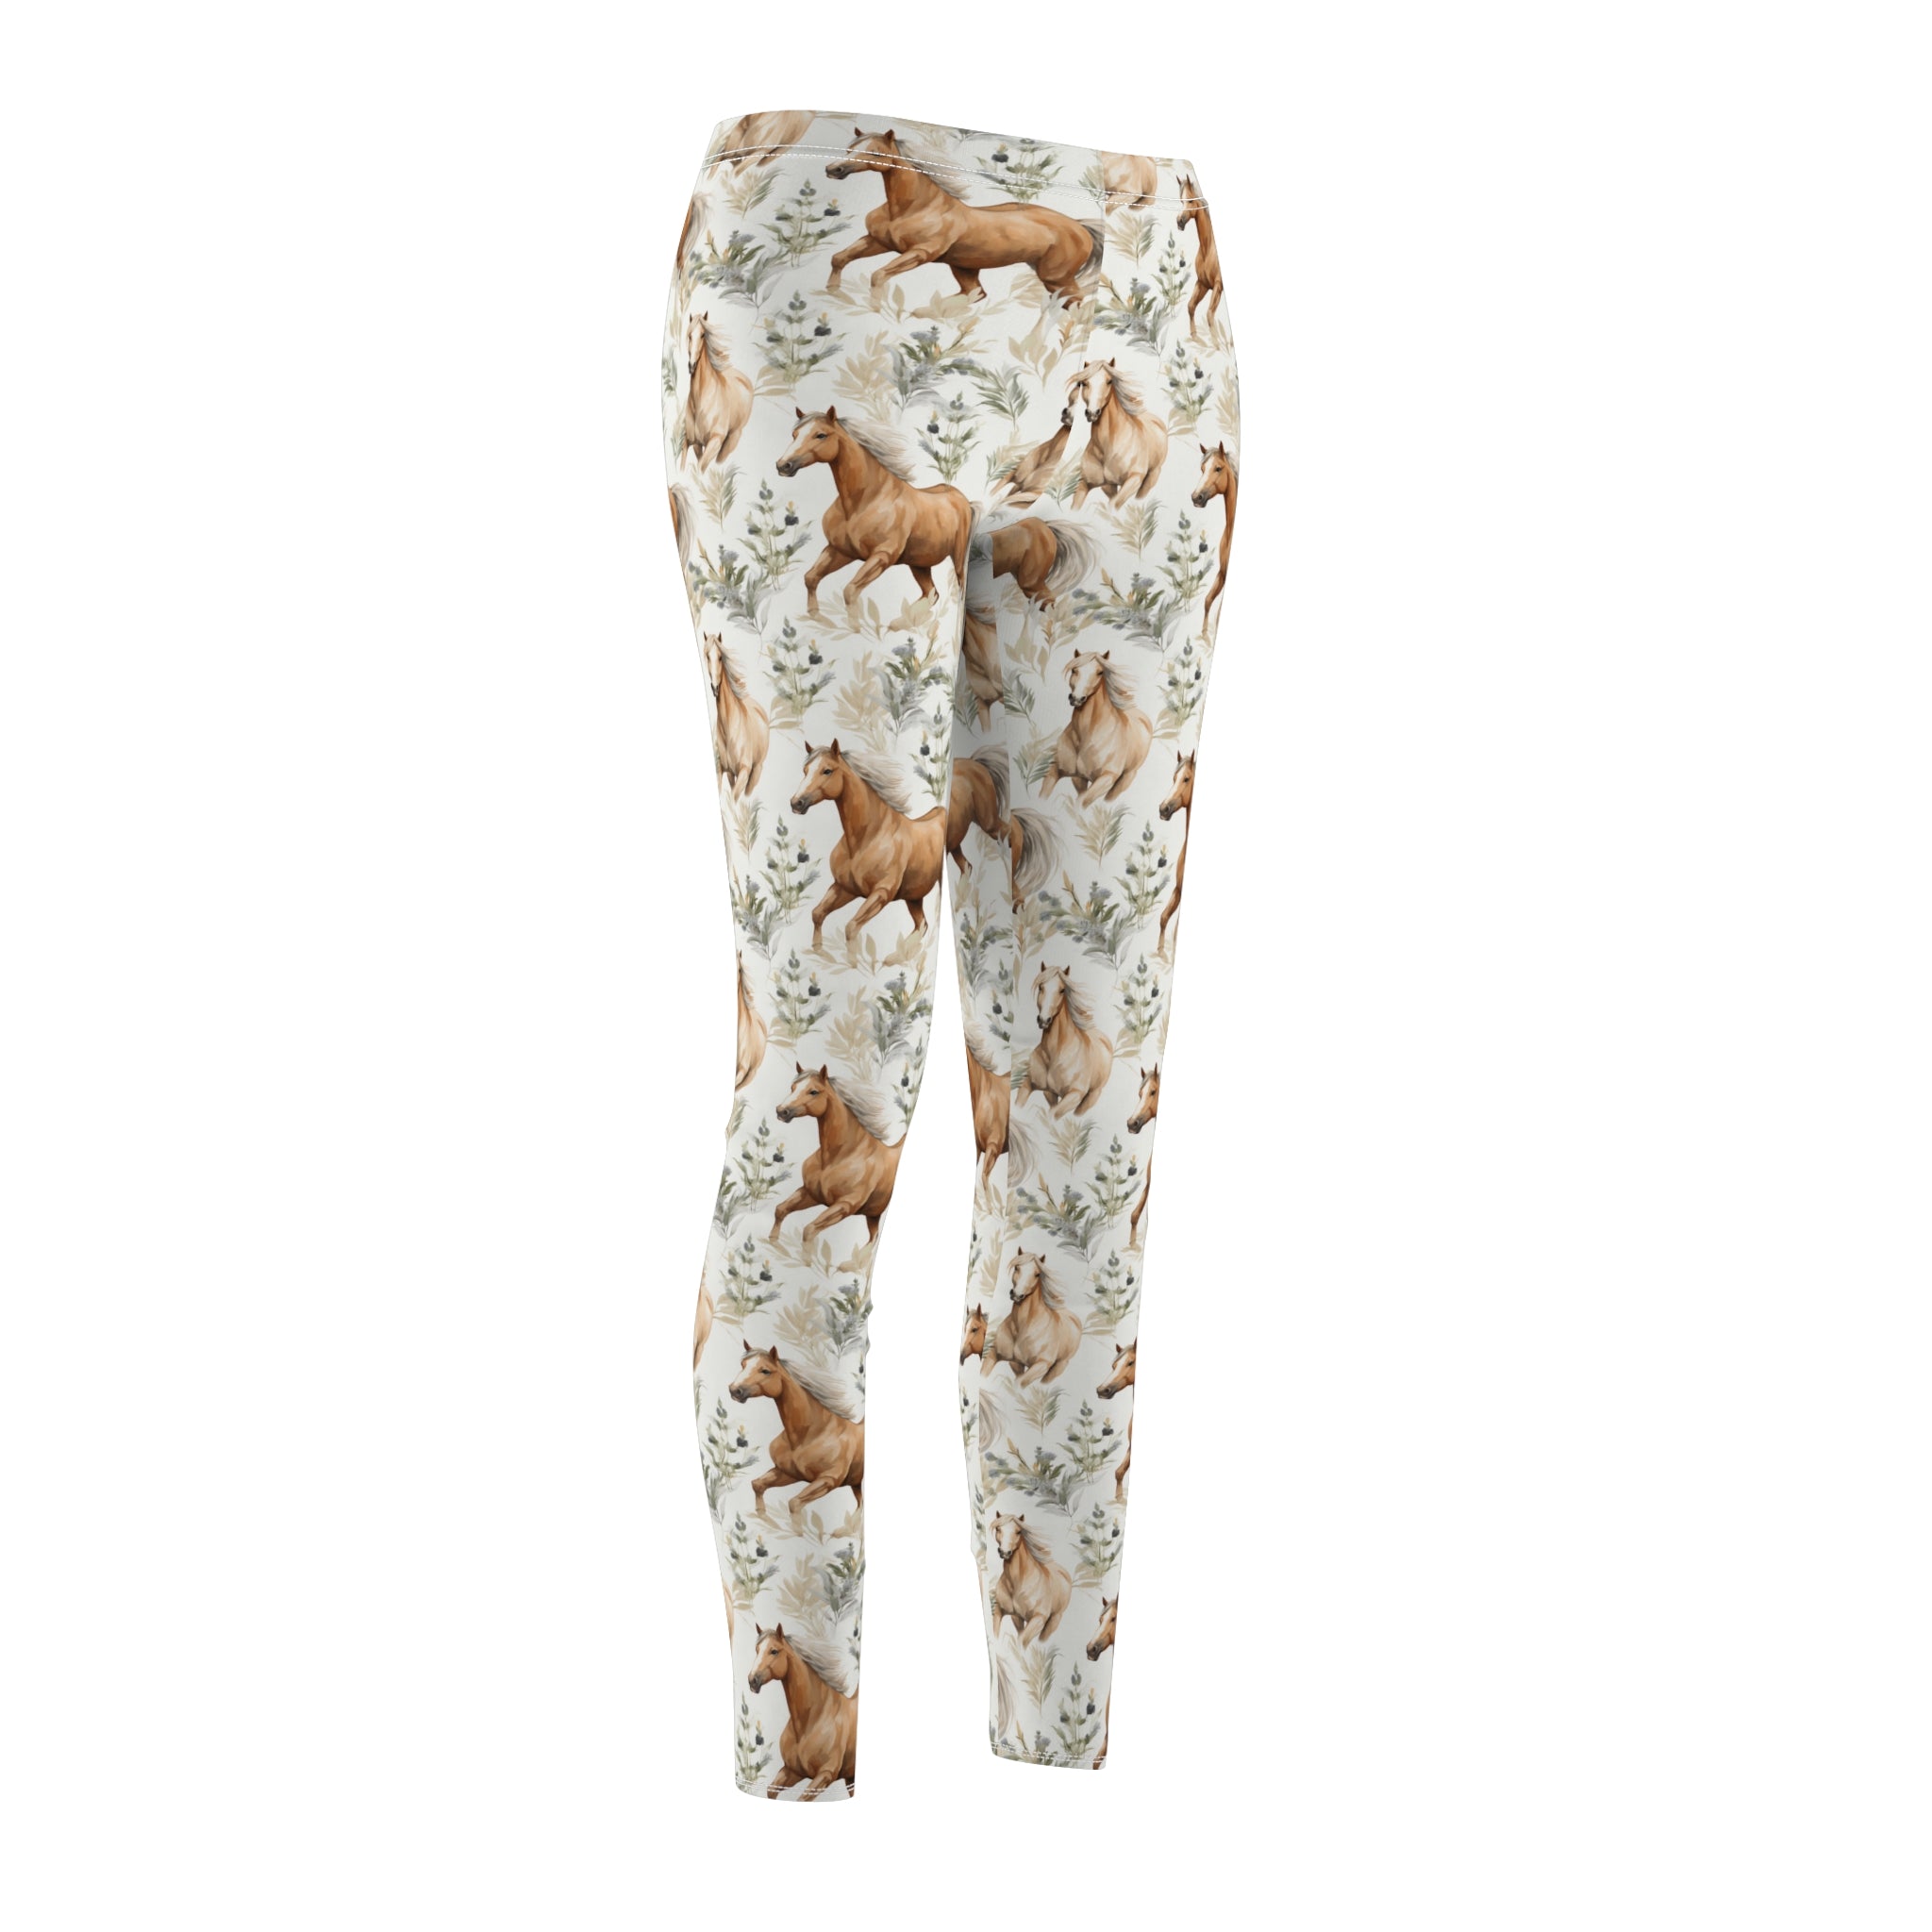 Rustic Horse Gym Leggings for Women XS-2XL - Country Style